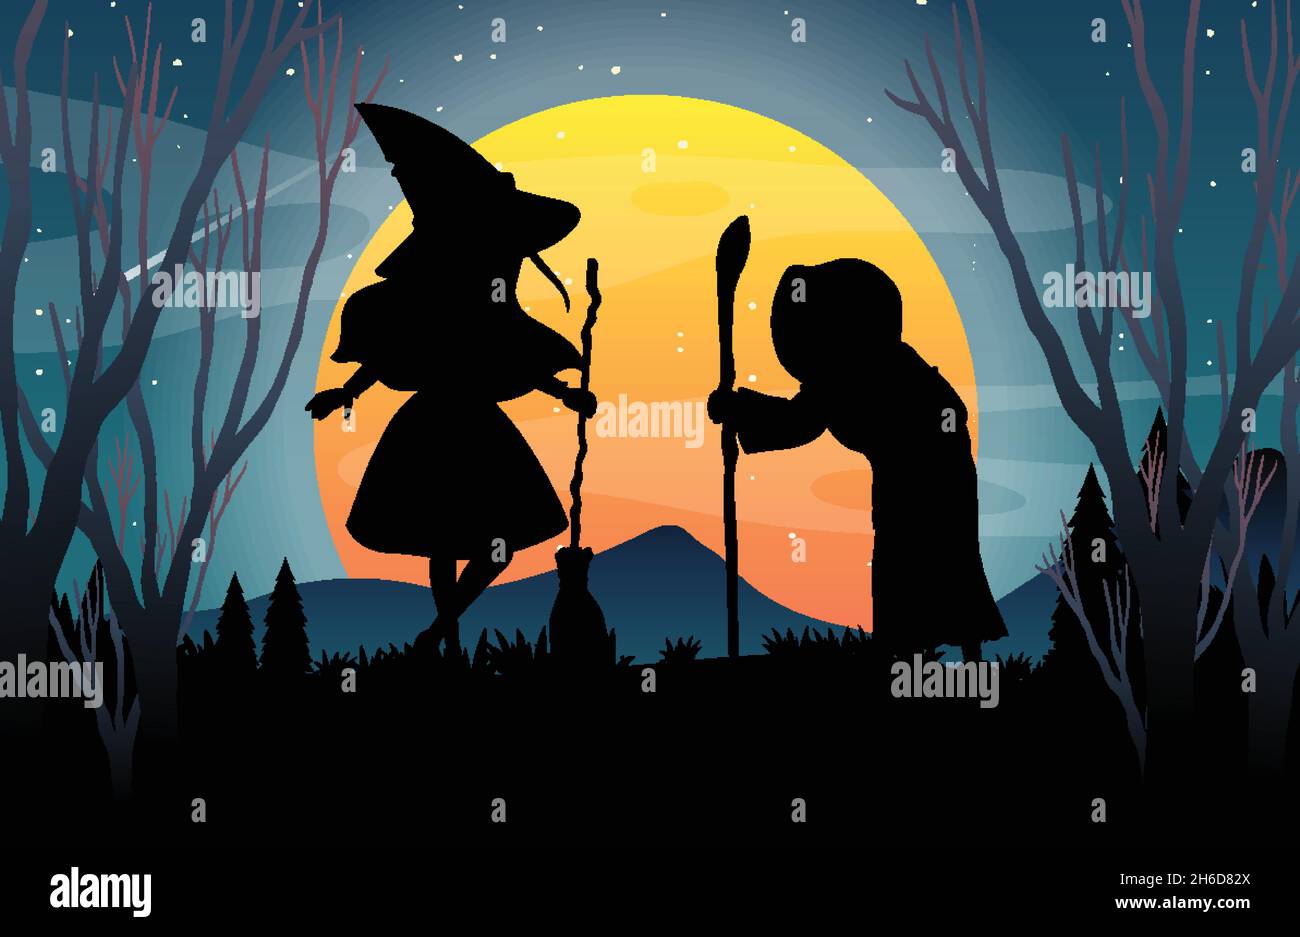 Halloween night background with witches silhouette illustration Stock Vector